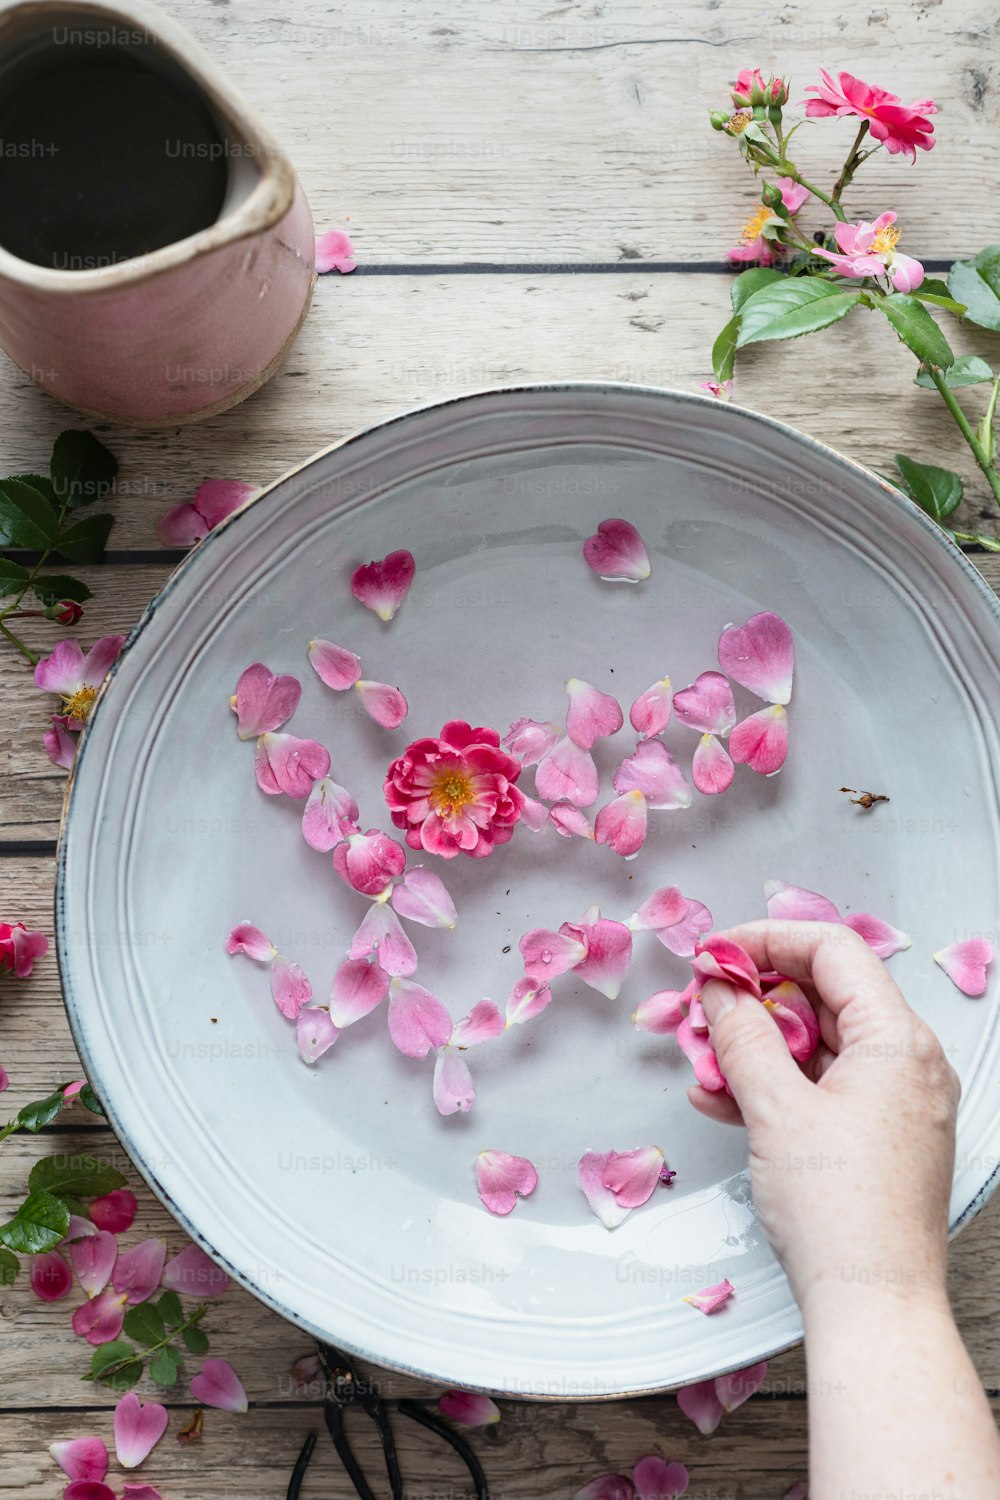 a person is arranging pink flowers on a white plate